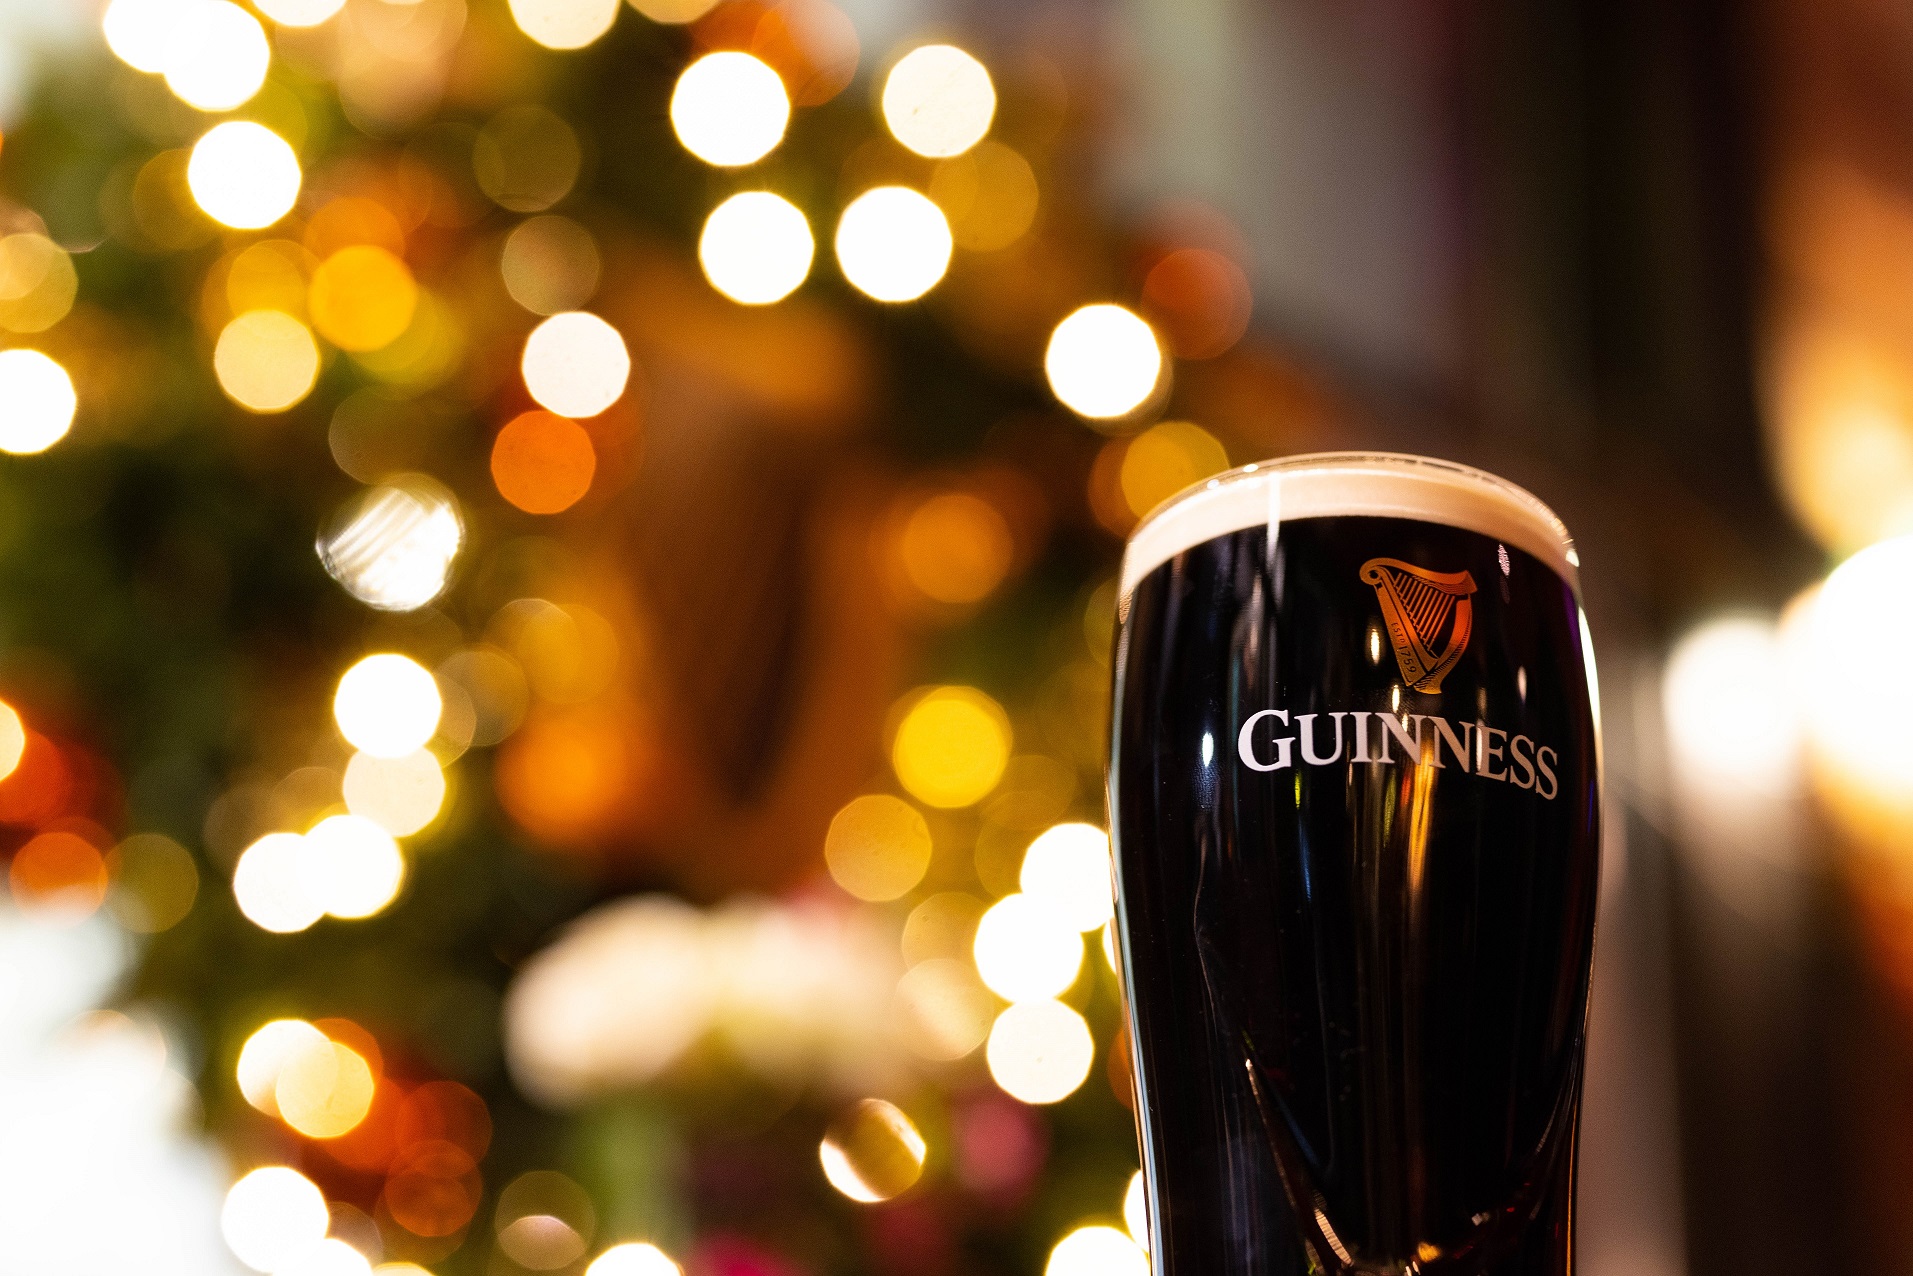 Guinness supporting pubs with Funds